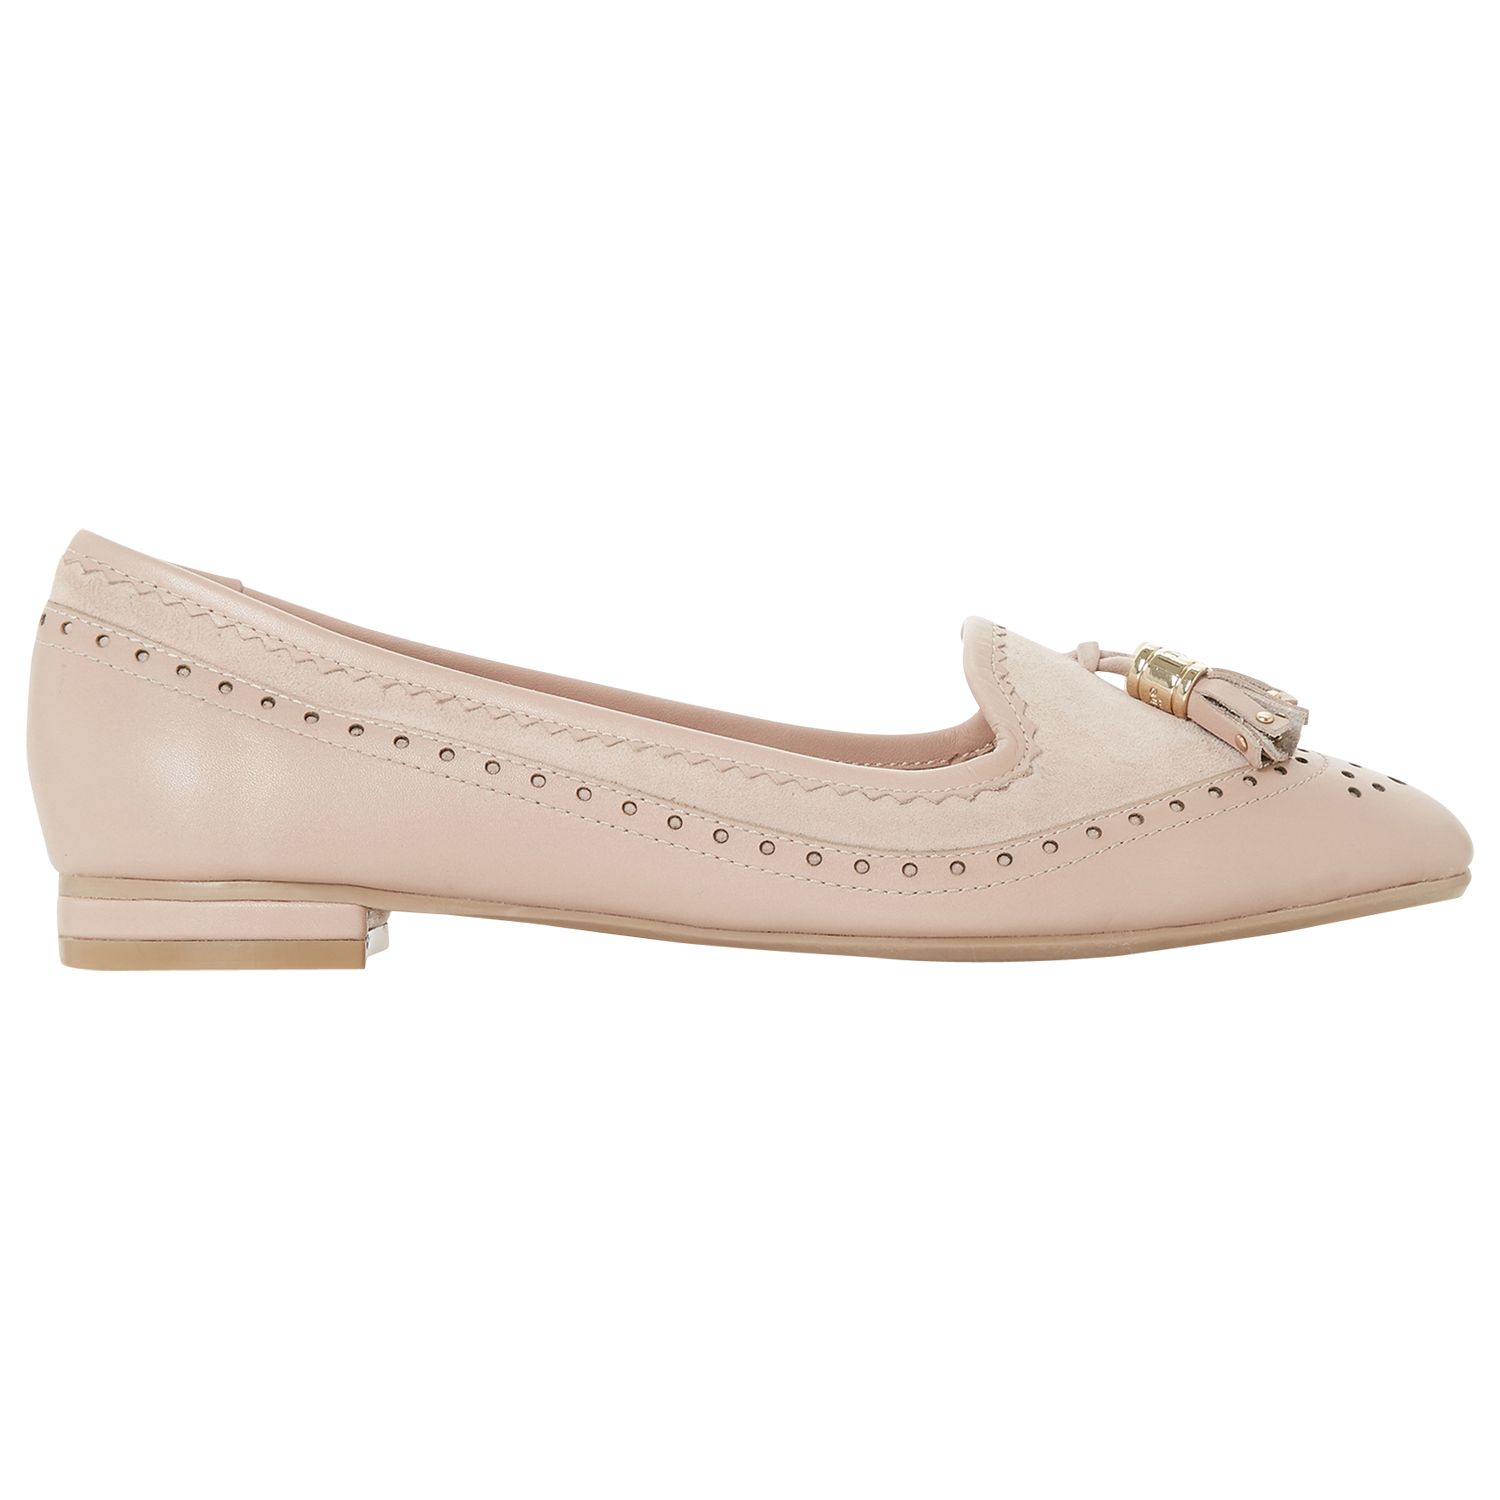 Dune Gambie Leather Loafers, Blush, 8